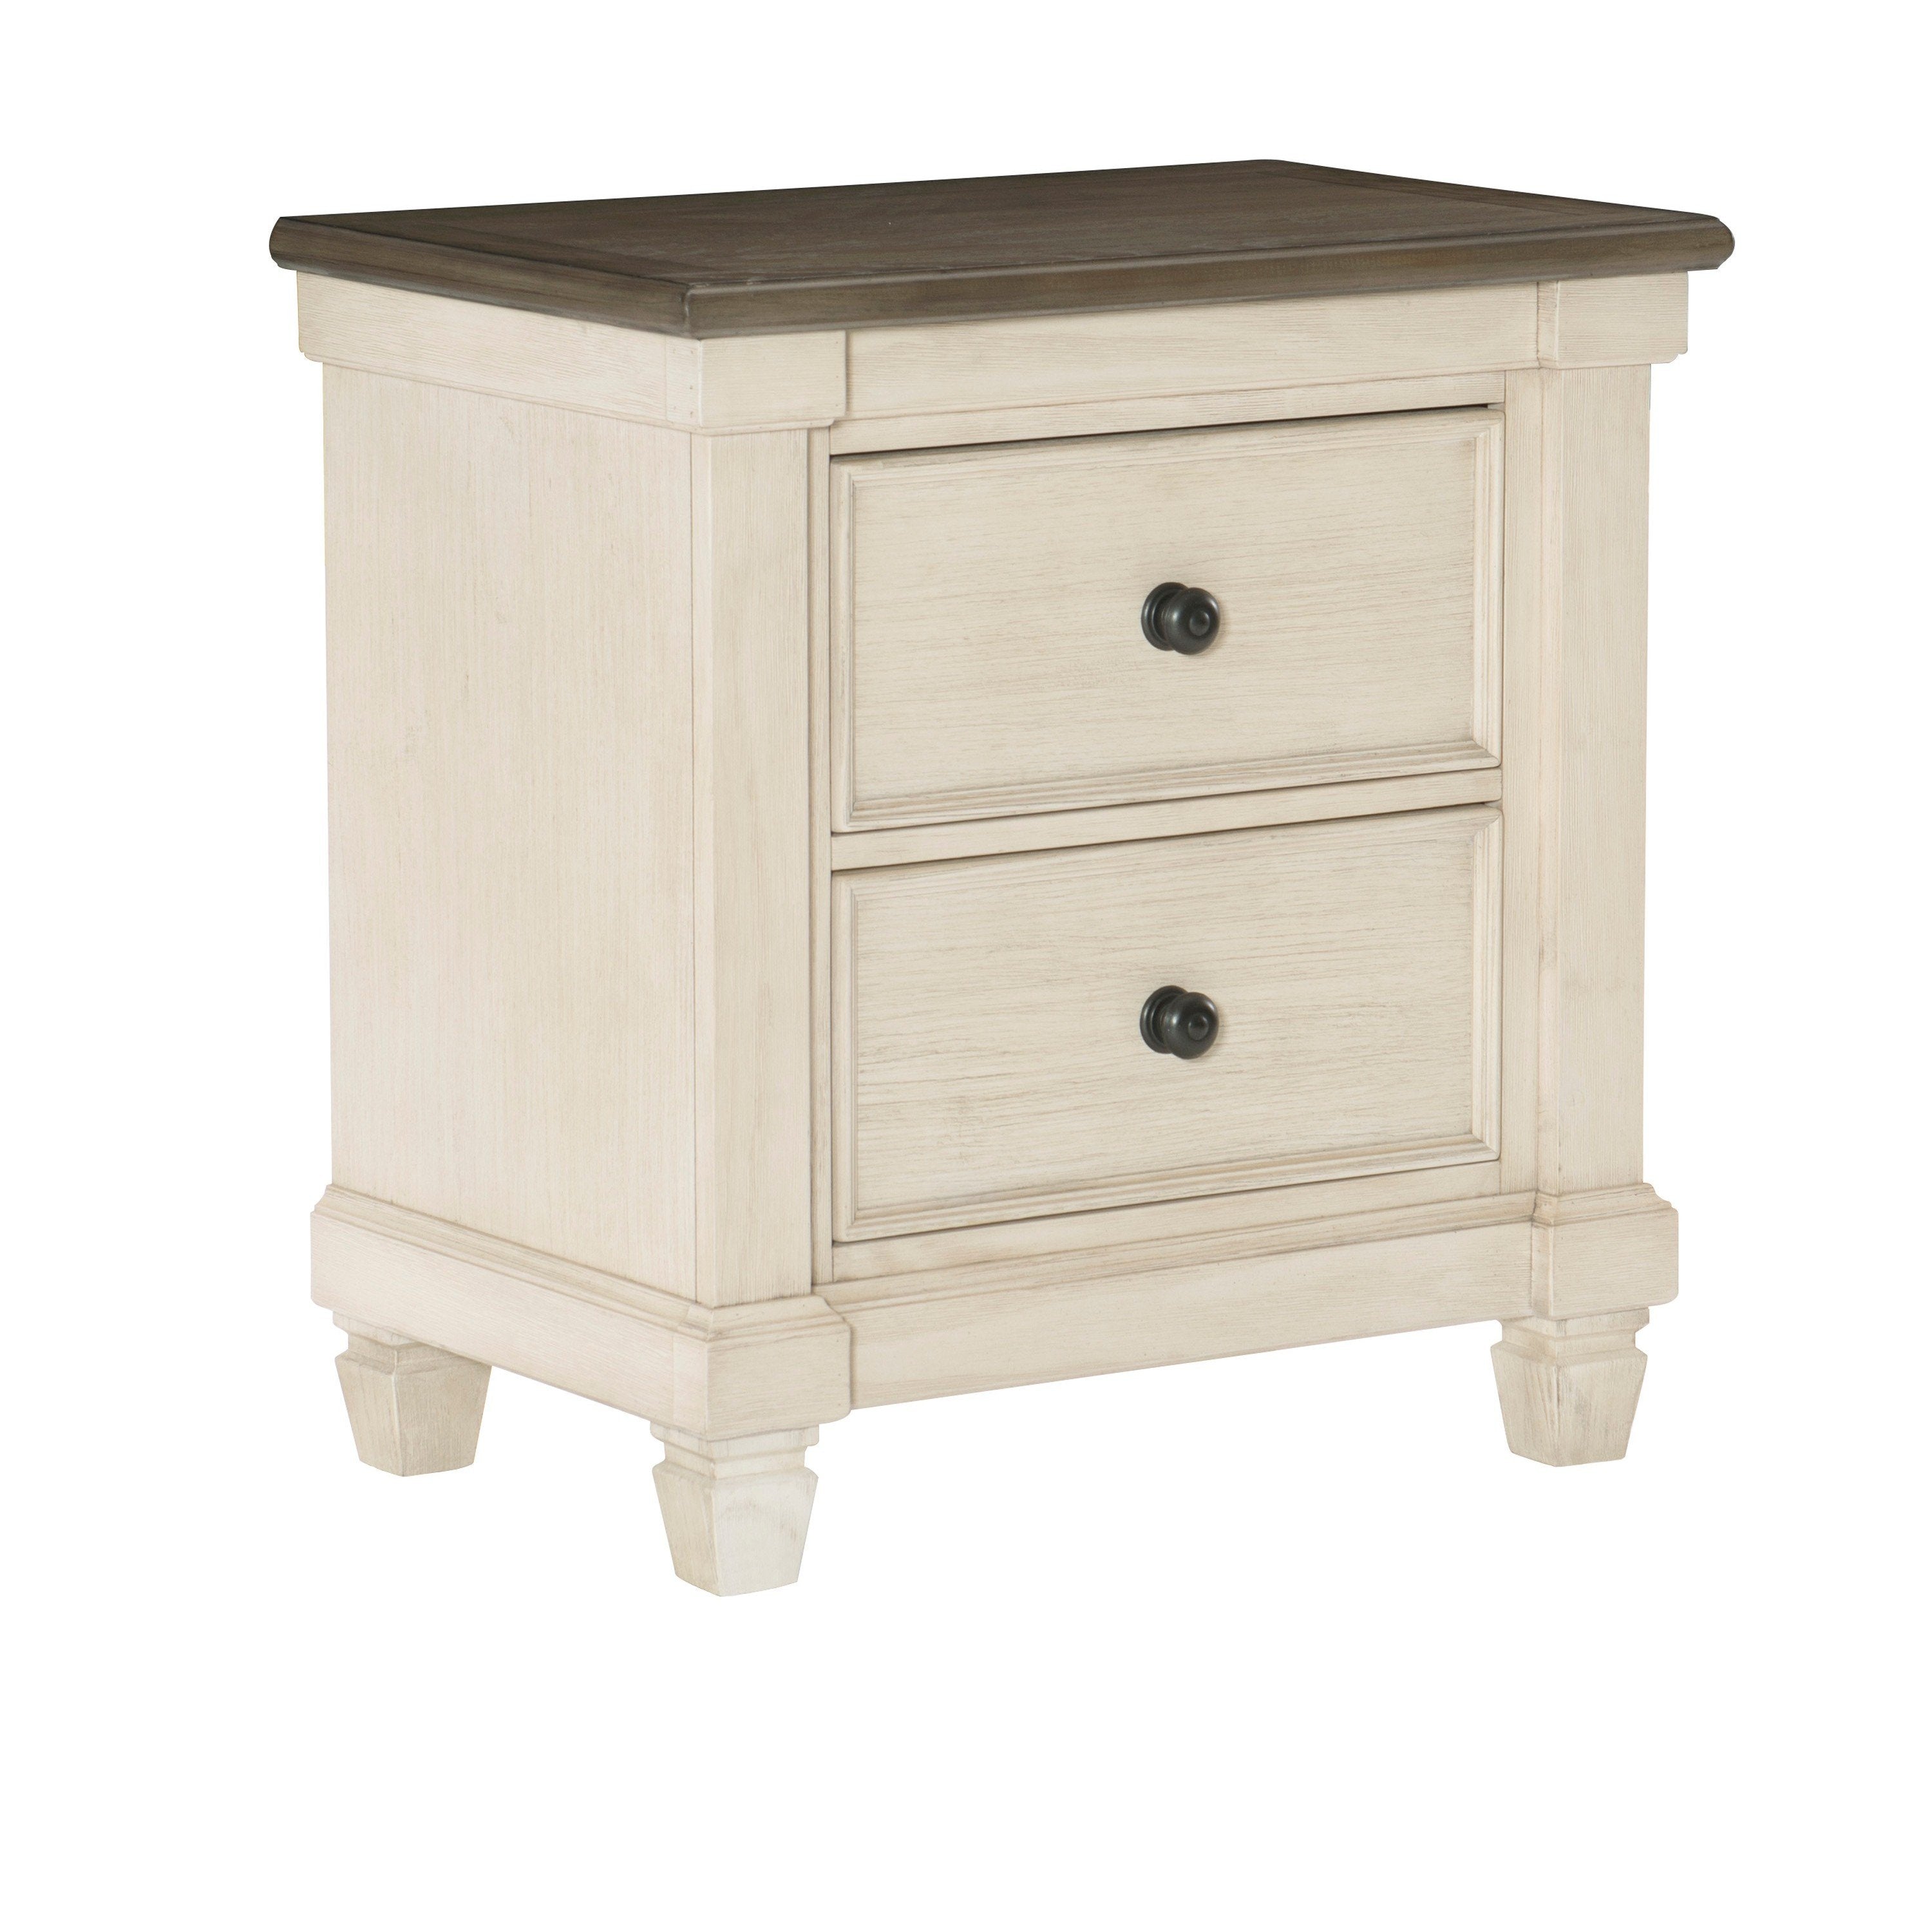 Benzara BM222645 2 Drawer Wooden Nightstand with Tapered Feet